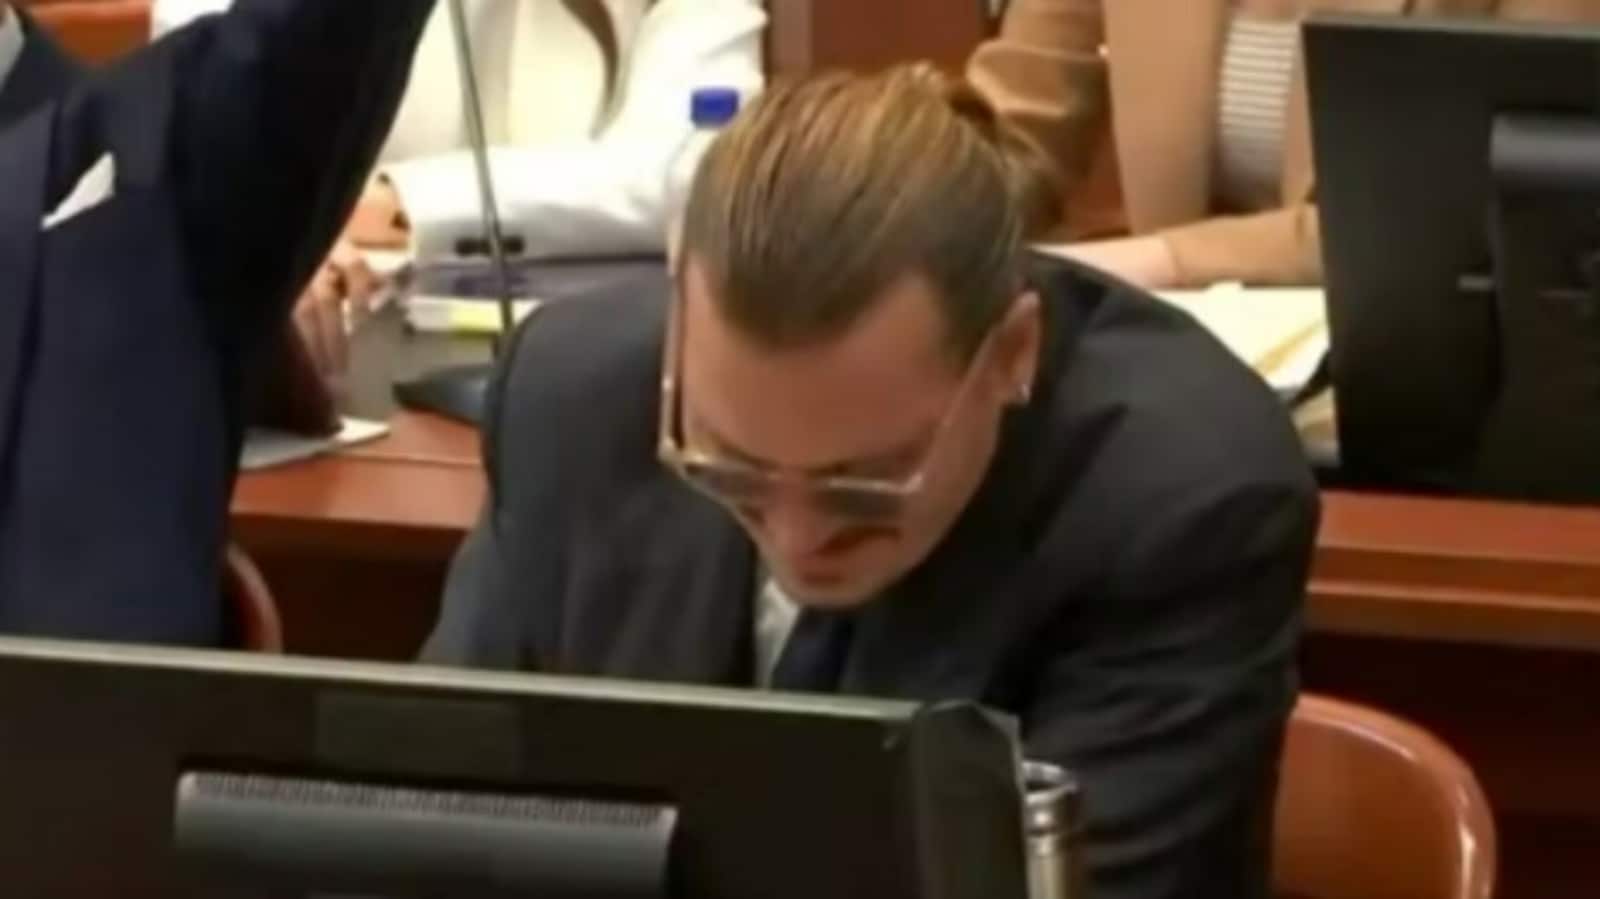 Johnny Depp smiles as Amber Heard’s lawyer imitates his voice amid trial